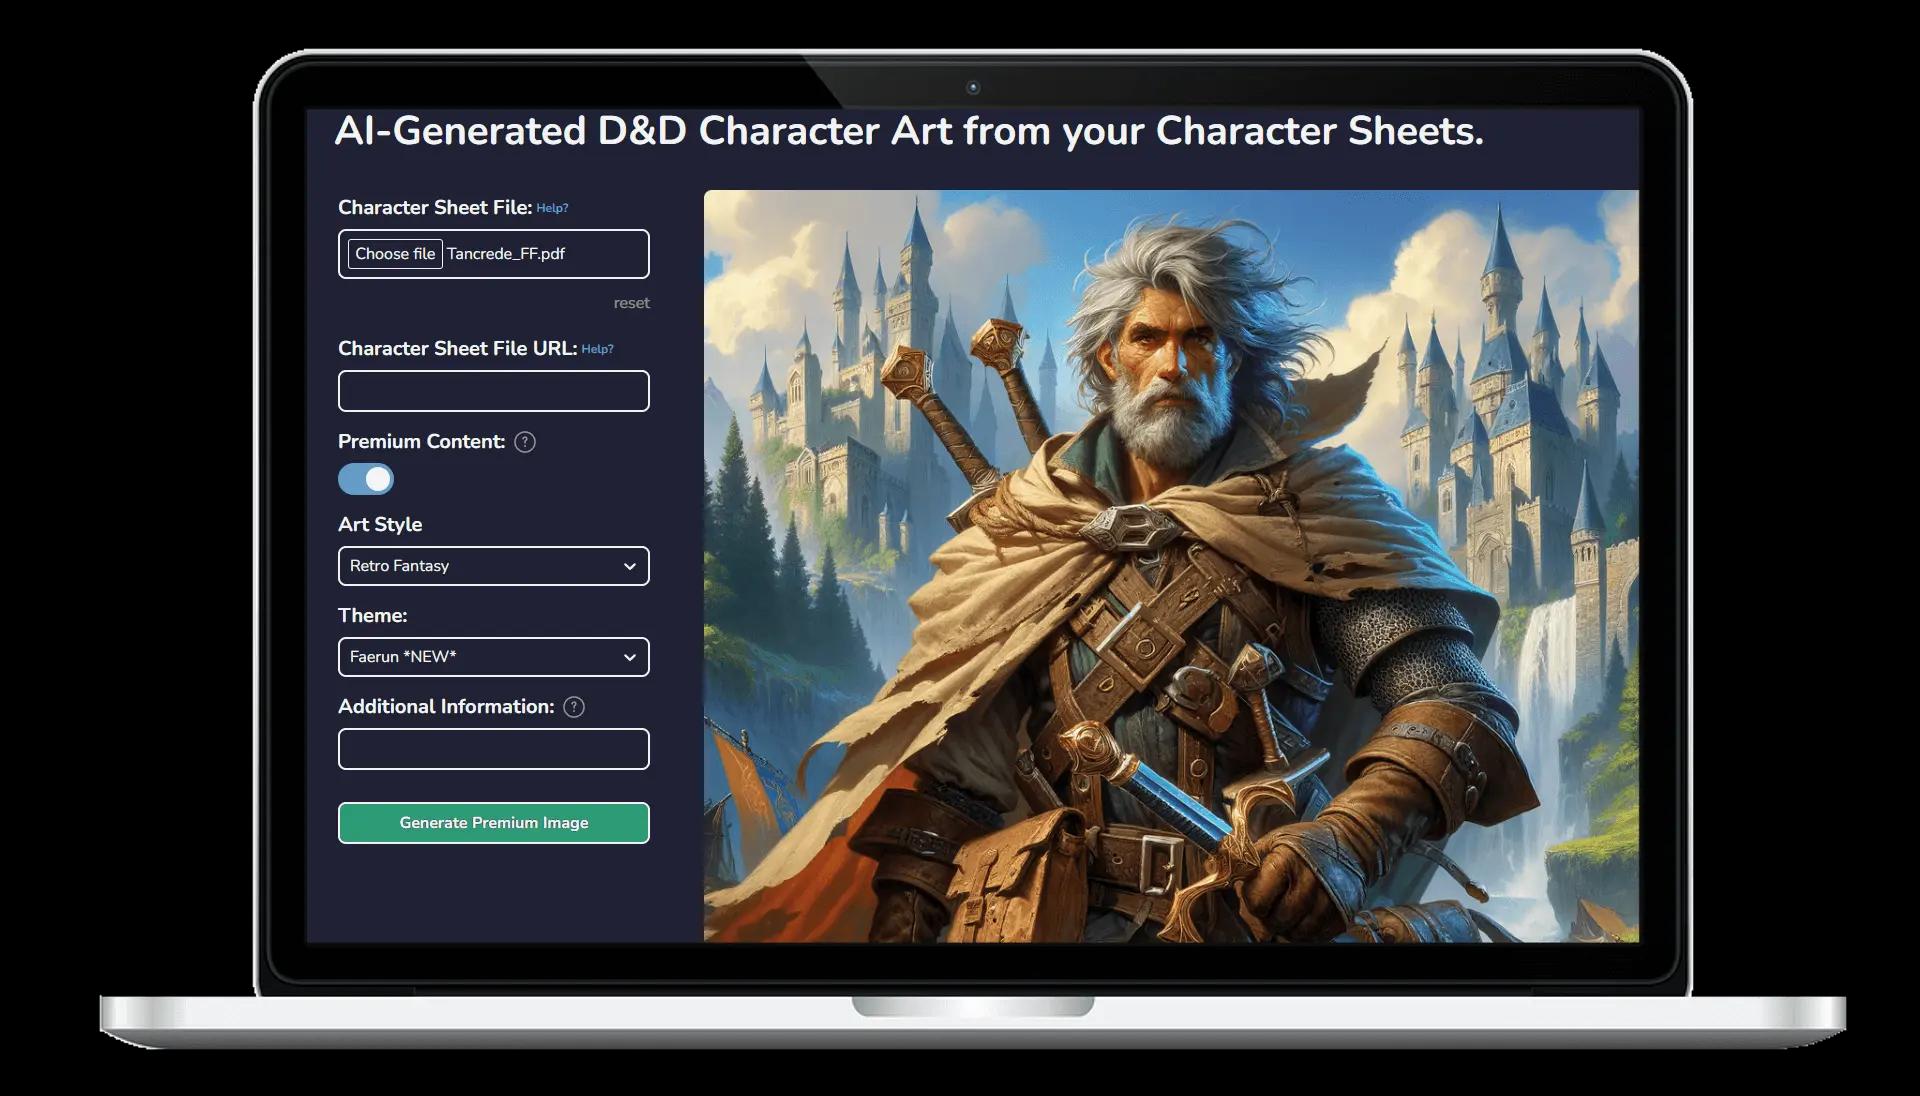 Chargen Homescreen displaying a generated D&D character on a laptop, showcasing AI Art and Character Generation for Dungeons & Dragons